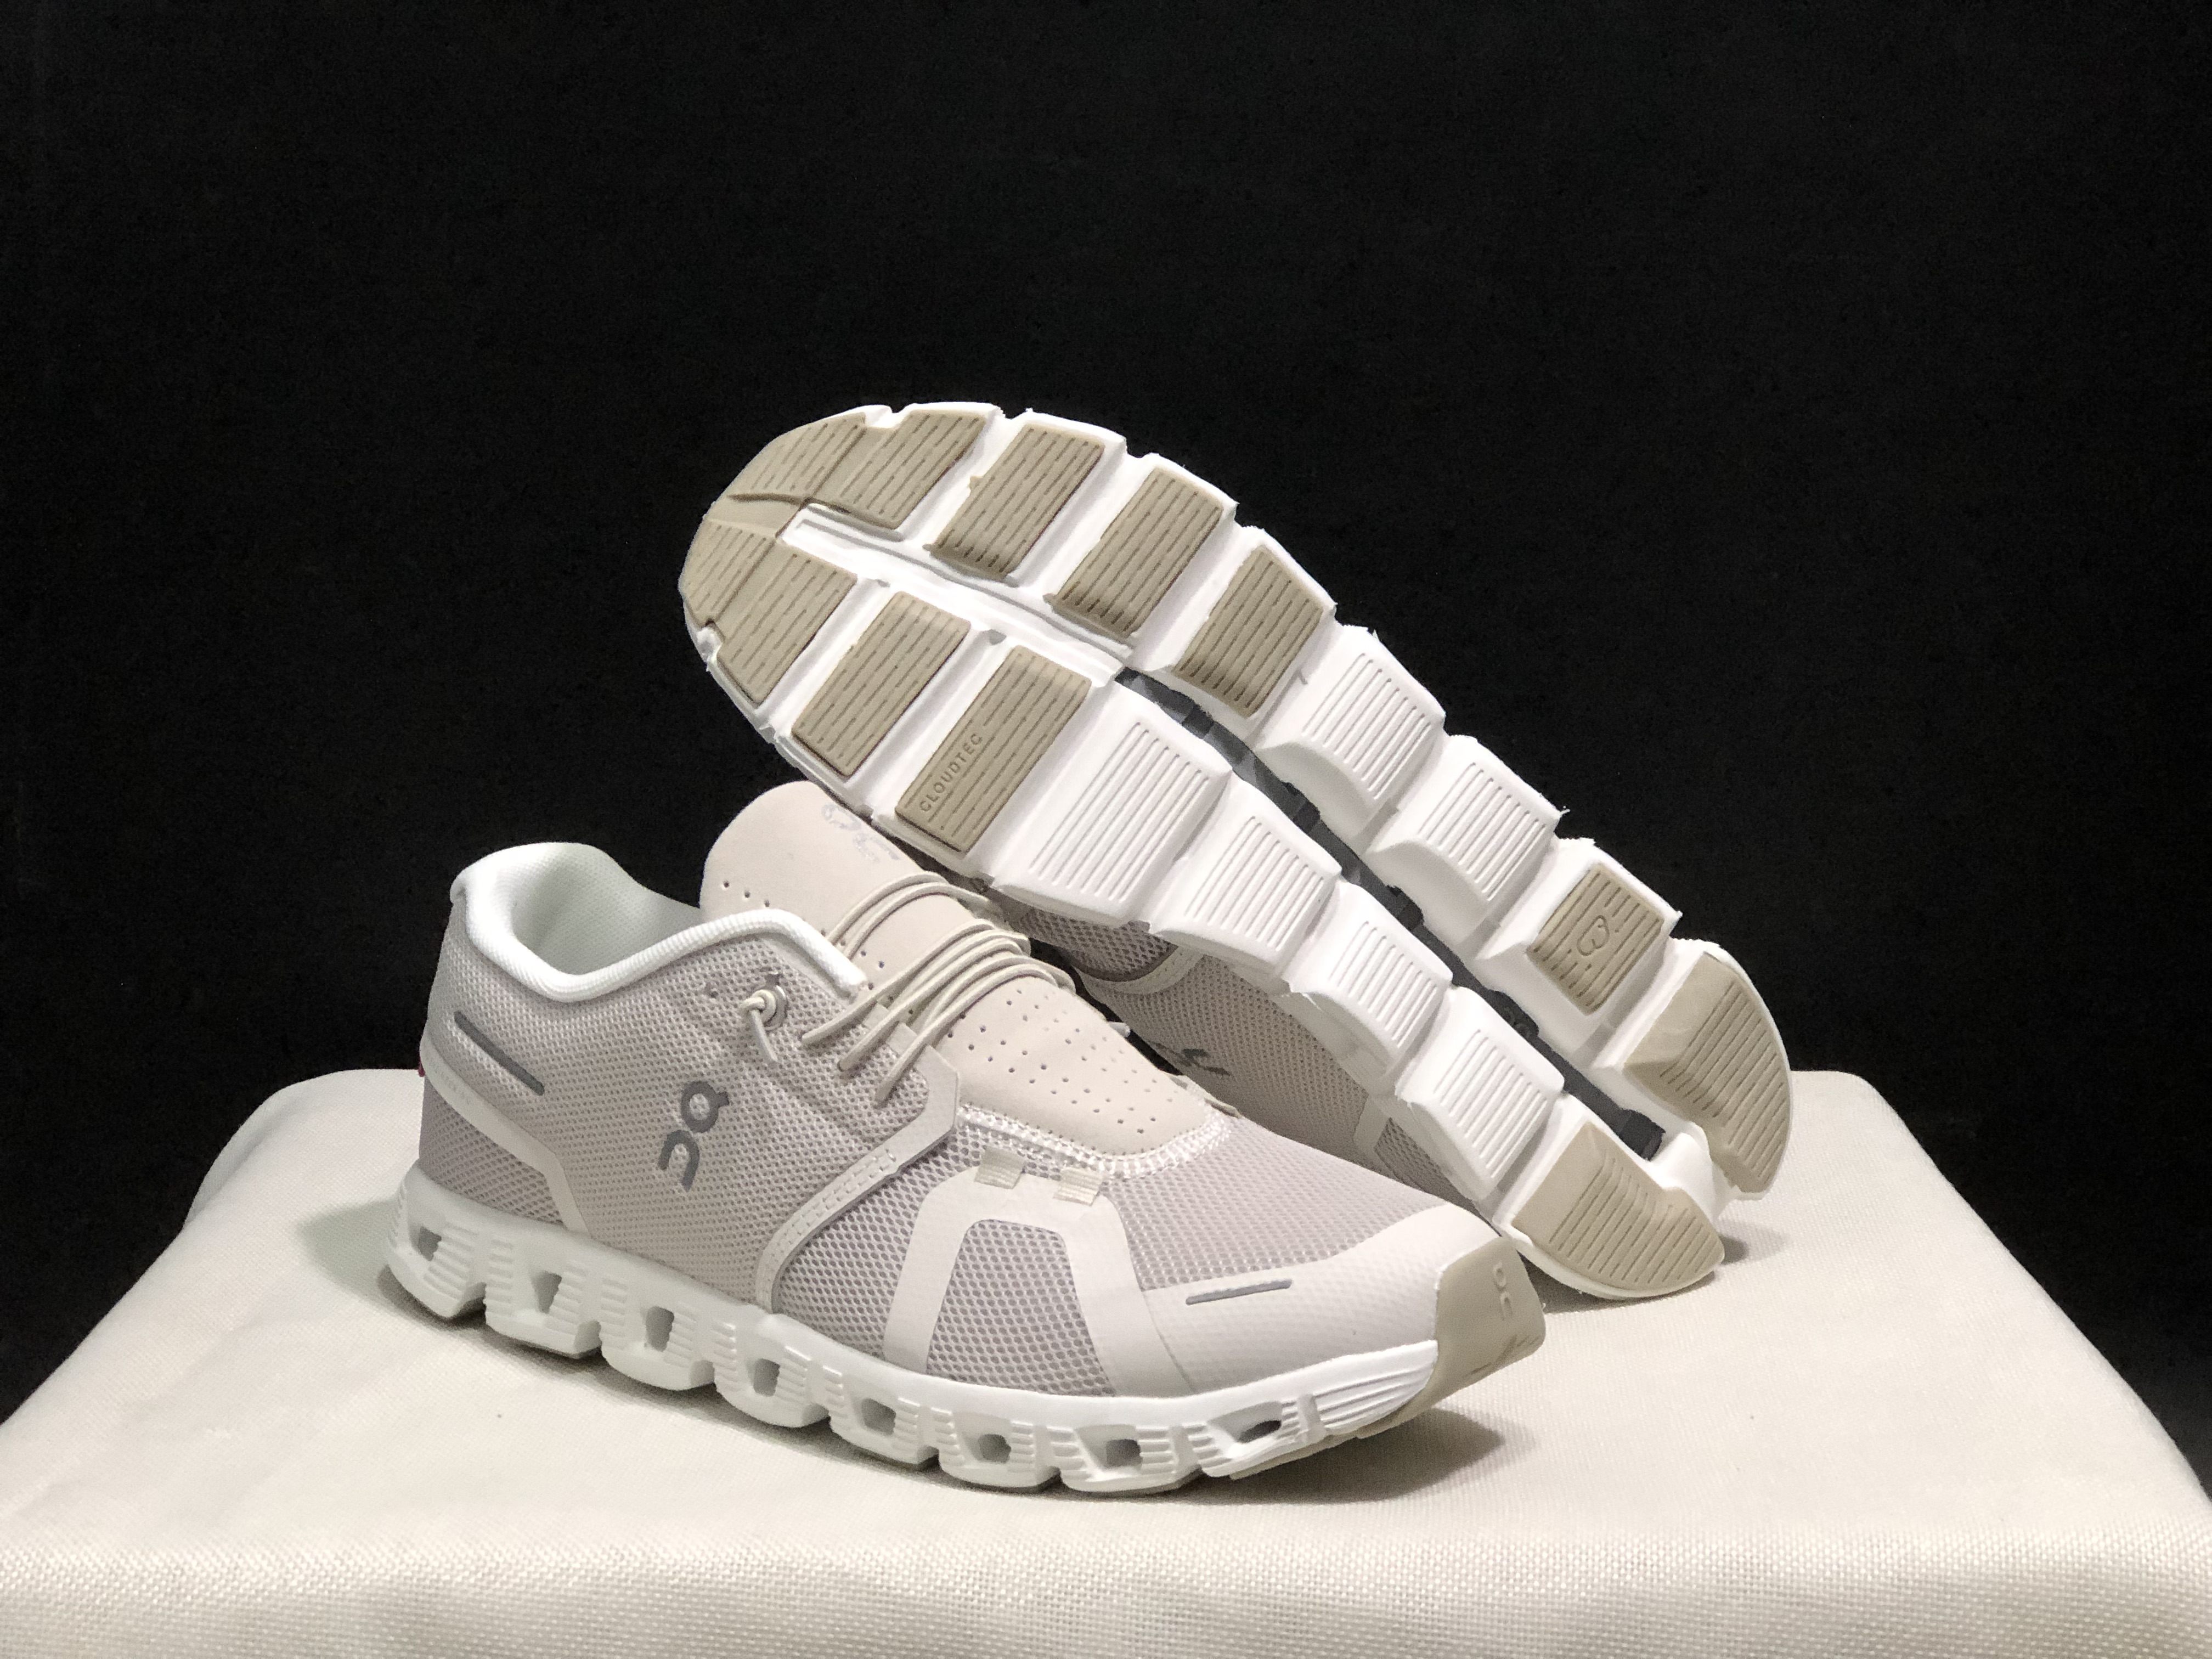 

cloud 5 Running Shoe RUN womans ALL White Black On cloudS Cloudnova Form BOY Girls Men 2023 Trainer Sports comfortable sneakers walking Eclipse Rose hiker Rose Shell, Black eclipse